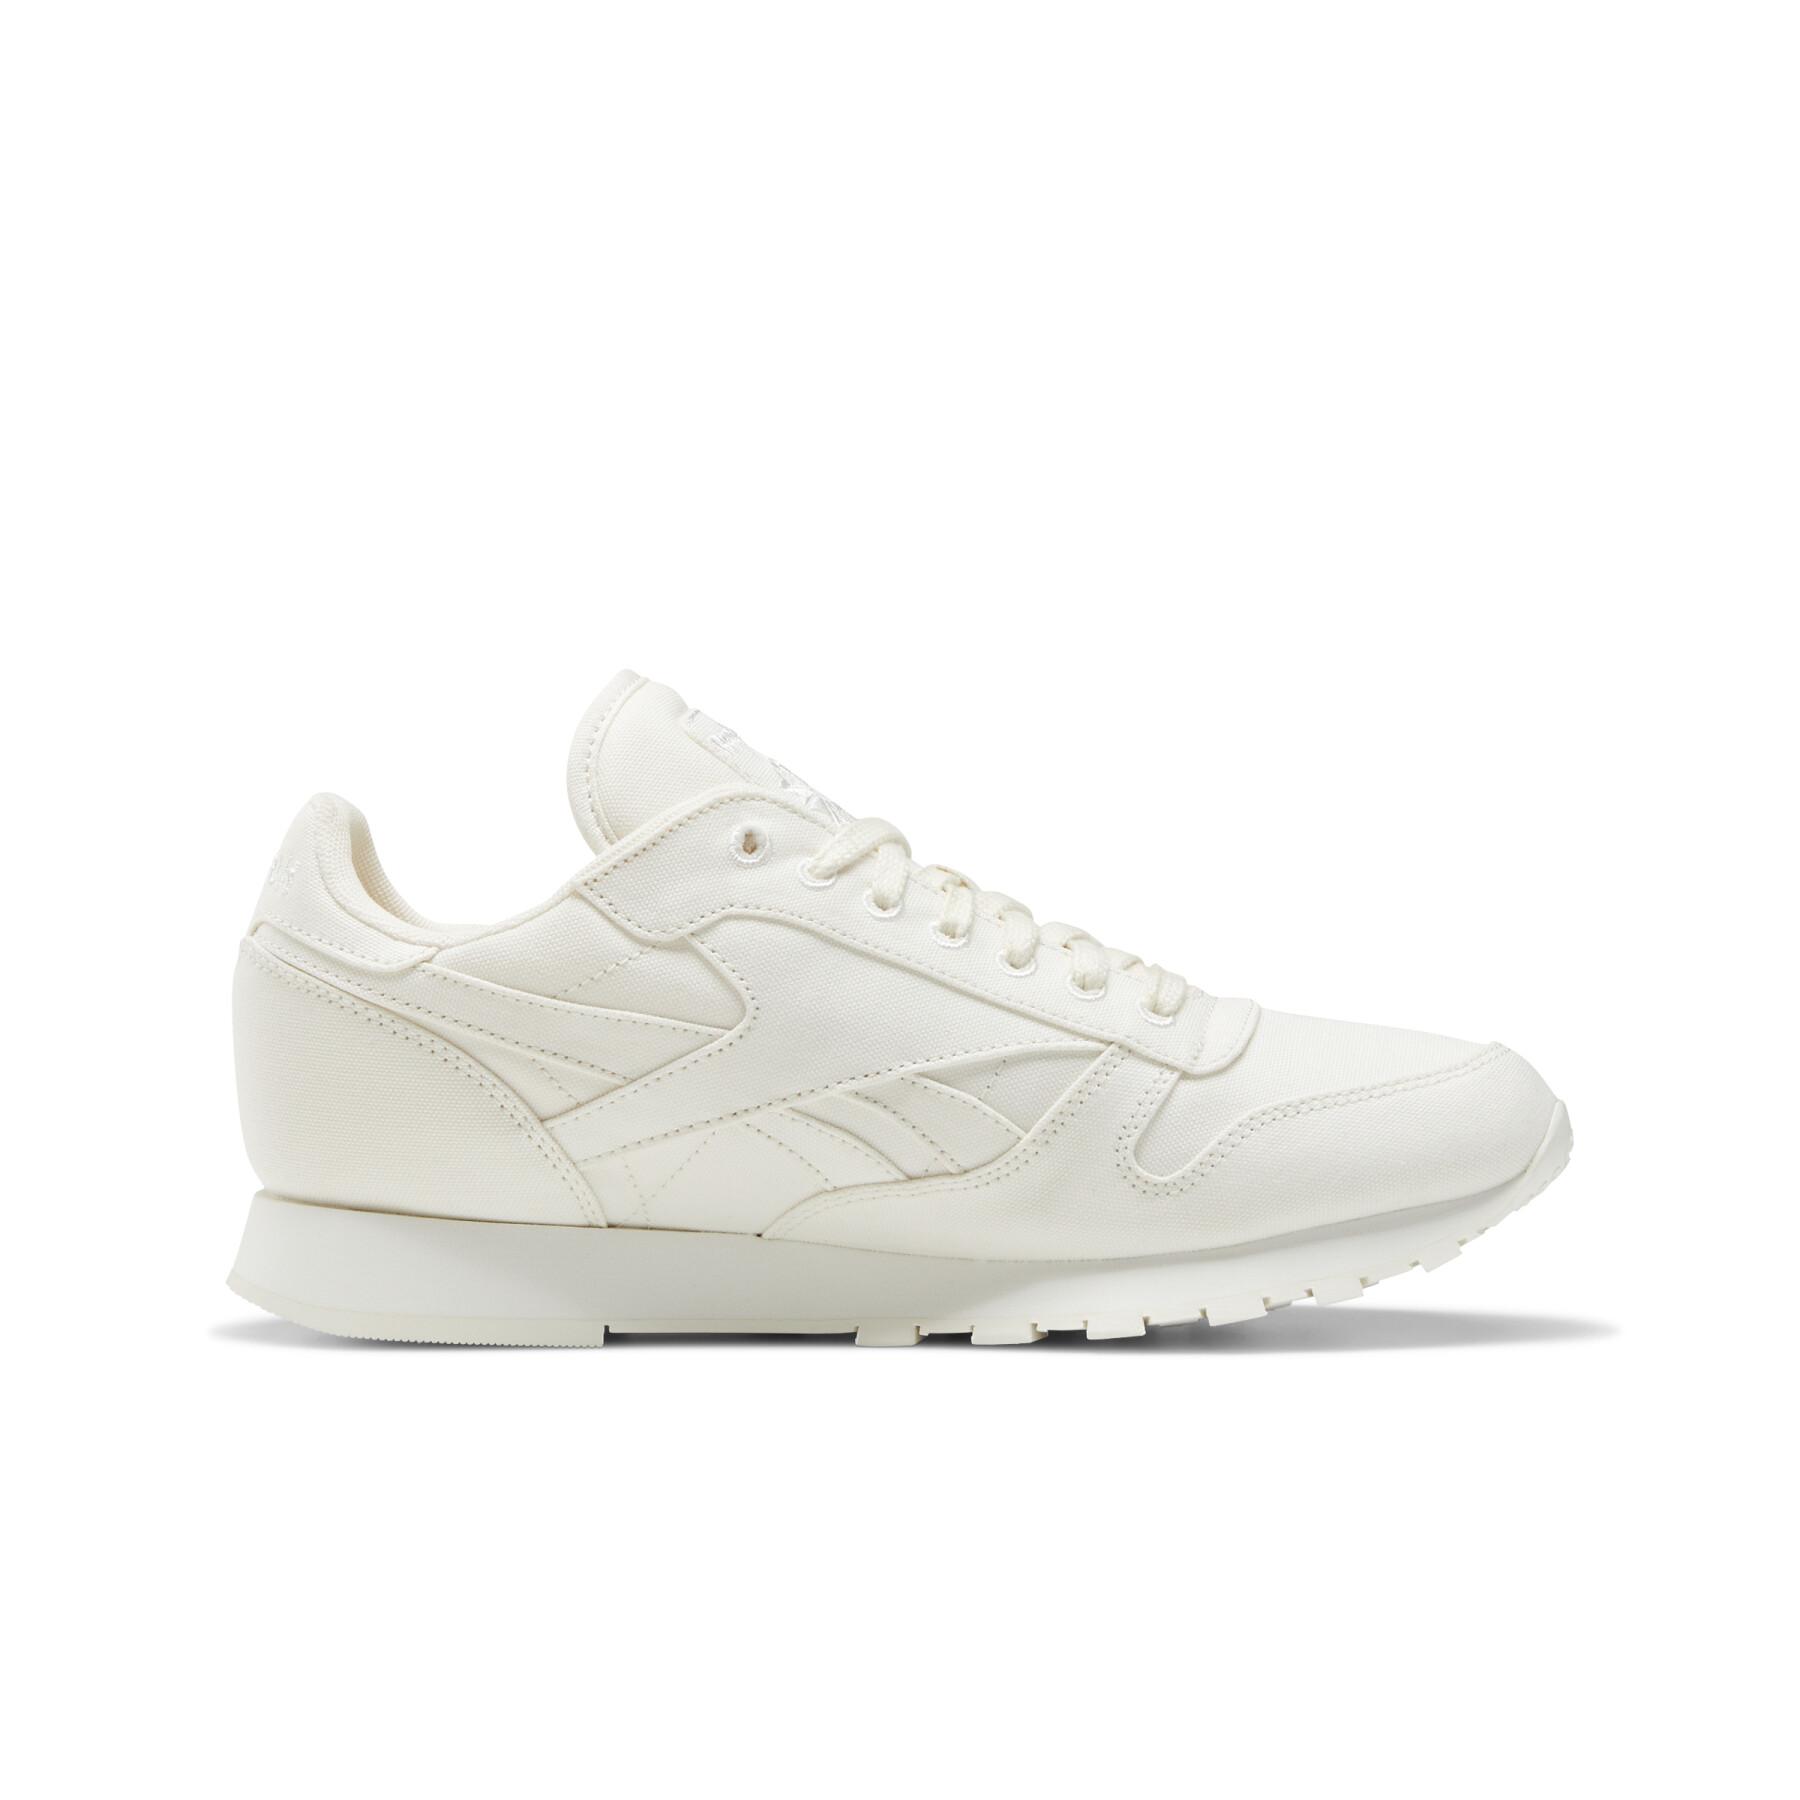 Chaussures Reebok Classics Leather Glow